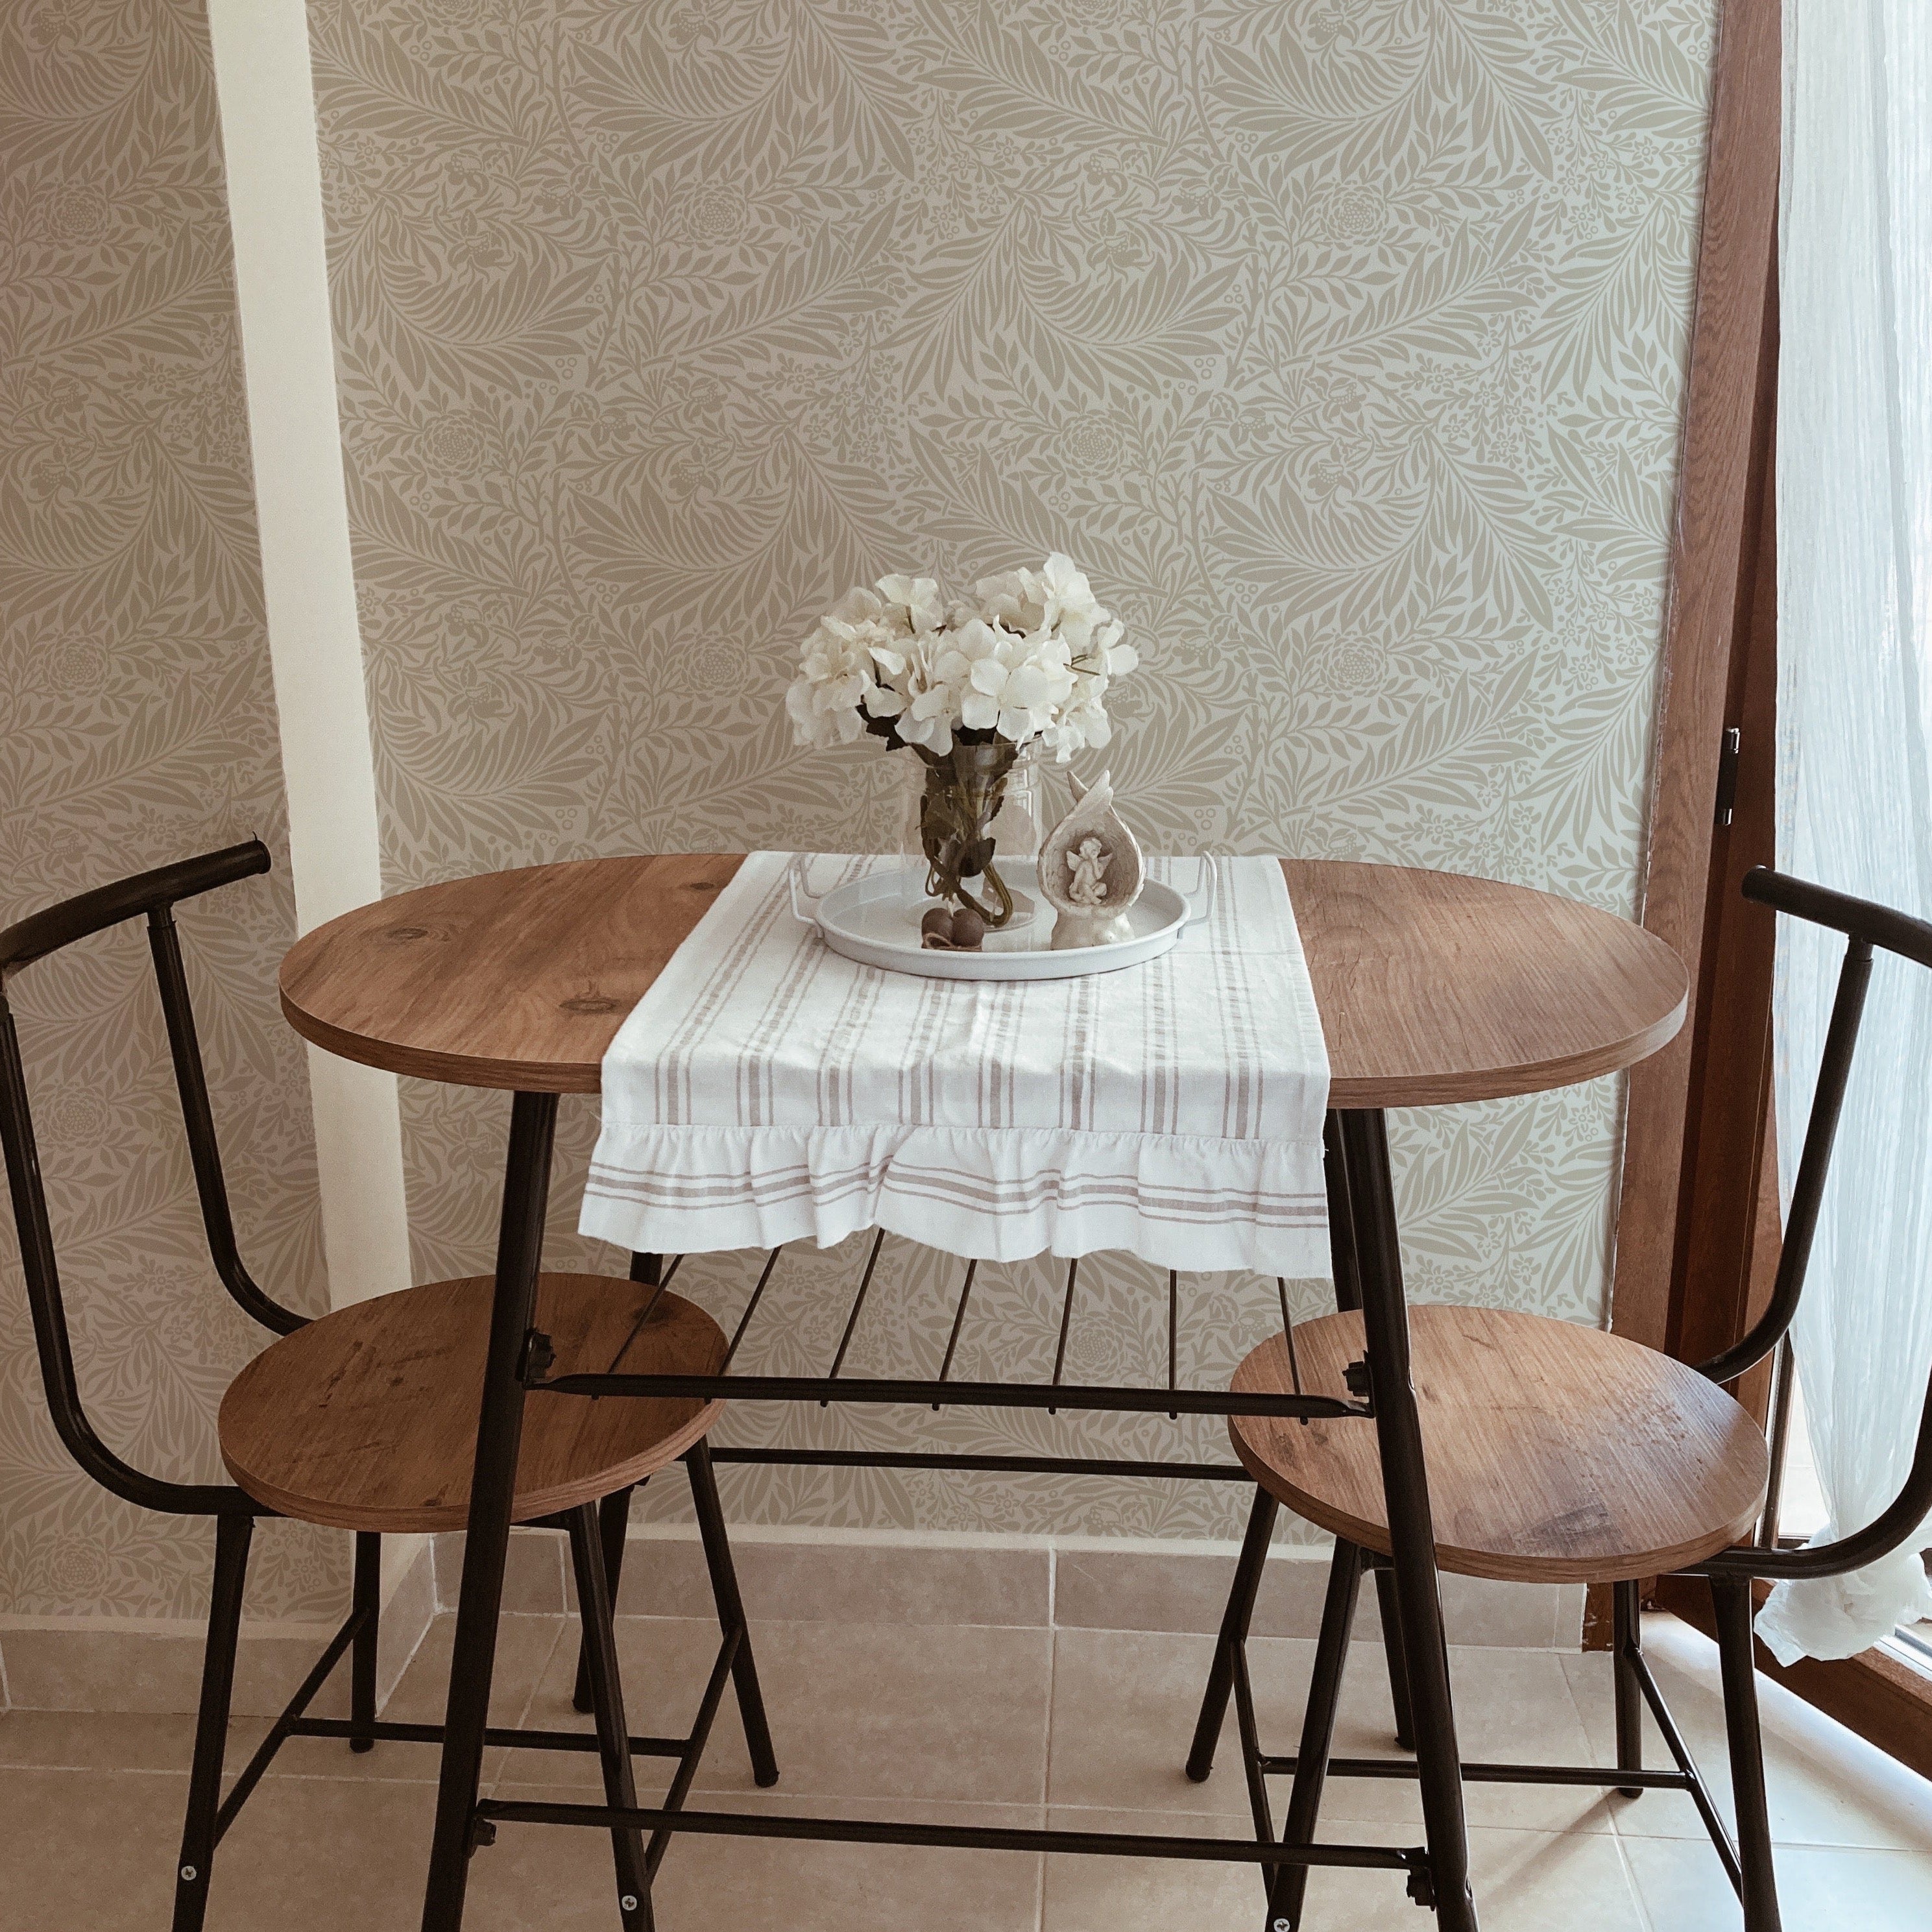  quaint dining area graced by the 'William Bough Wallpaper', featuring a round wooden table with black chairs, set under a simple white cloth and a vase of white flowers